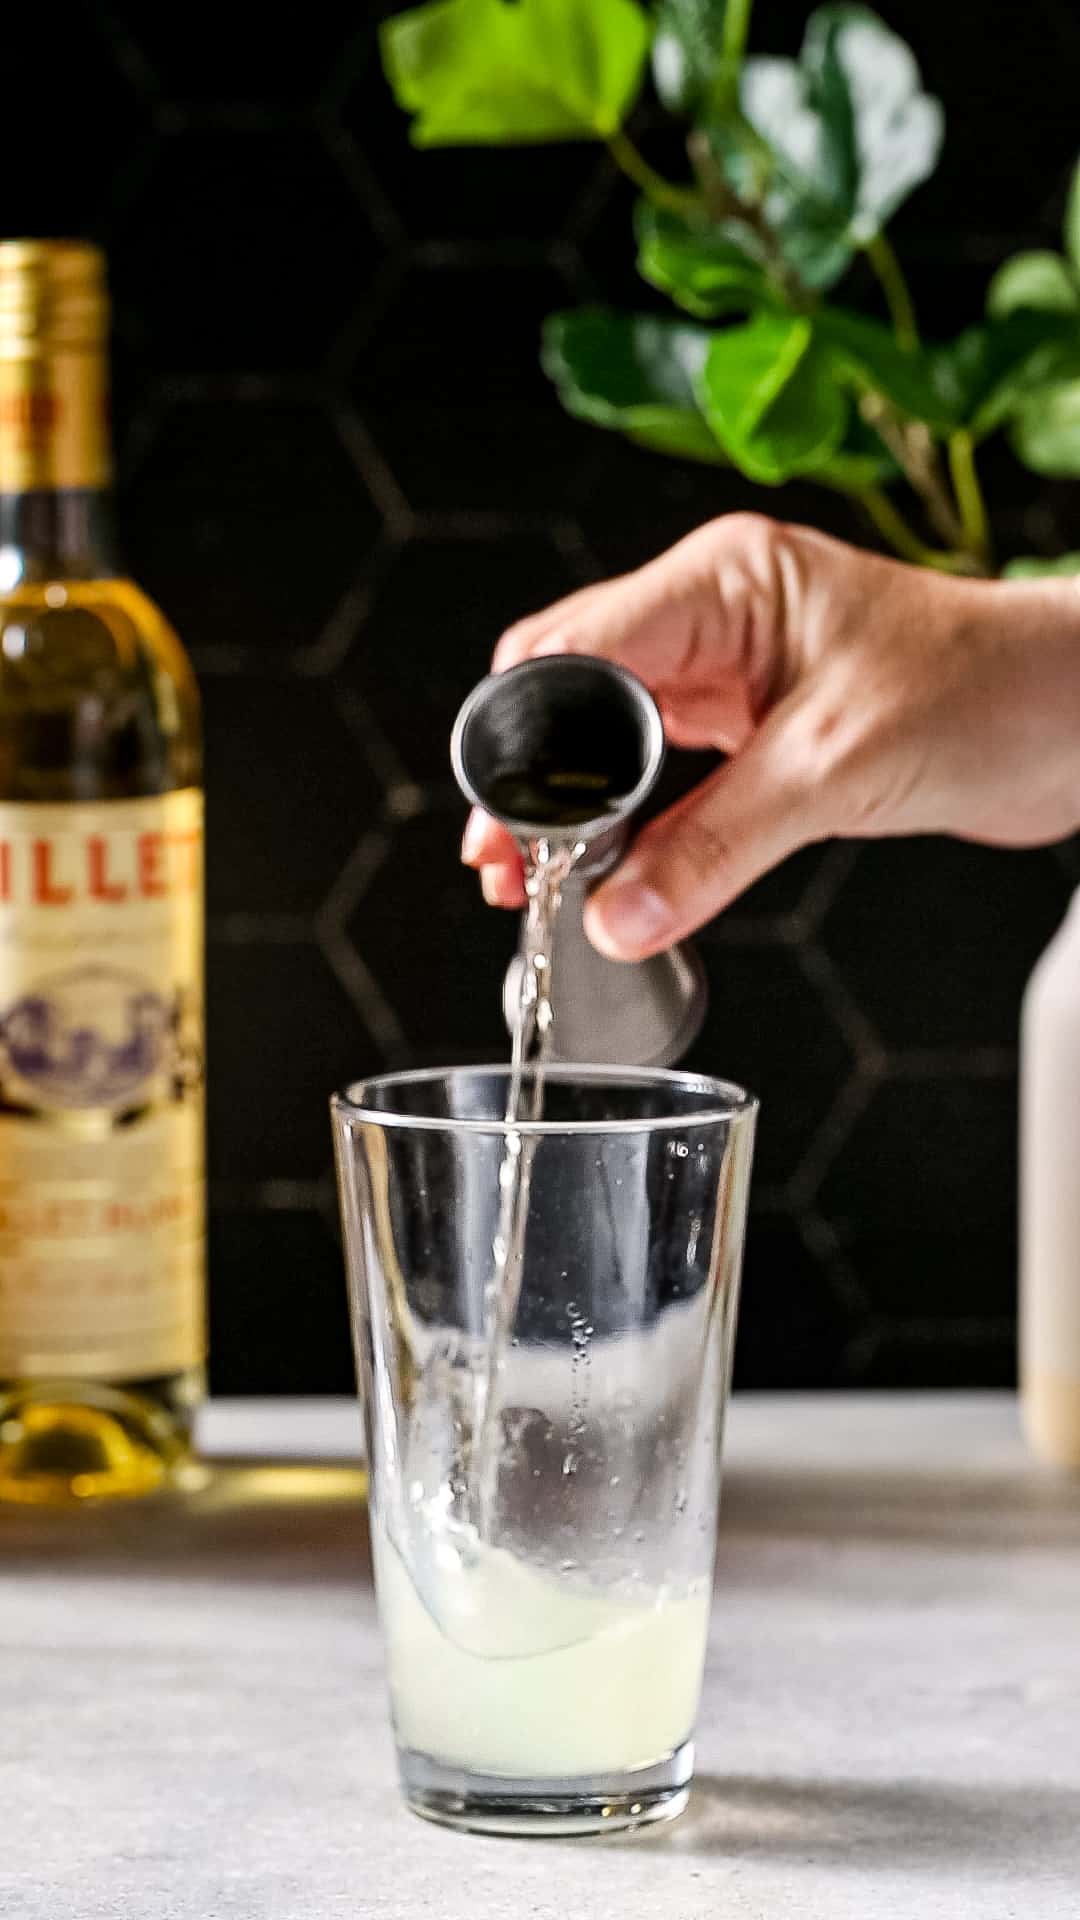 Hand adding Lillet Blanc from a jigger into a cocktail shaker.